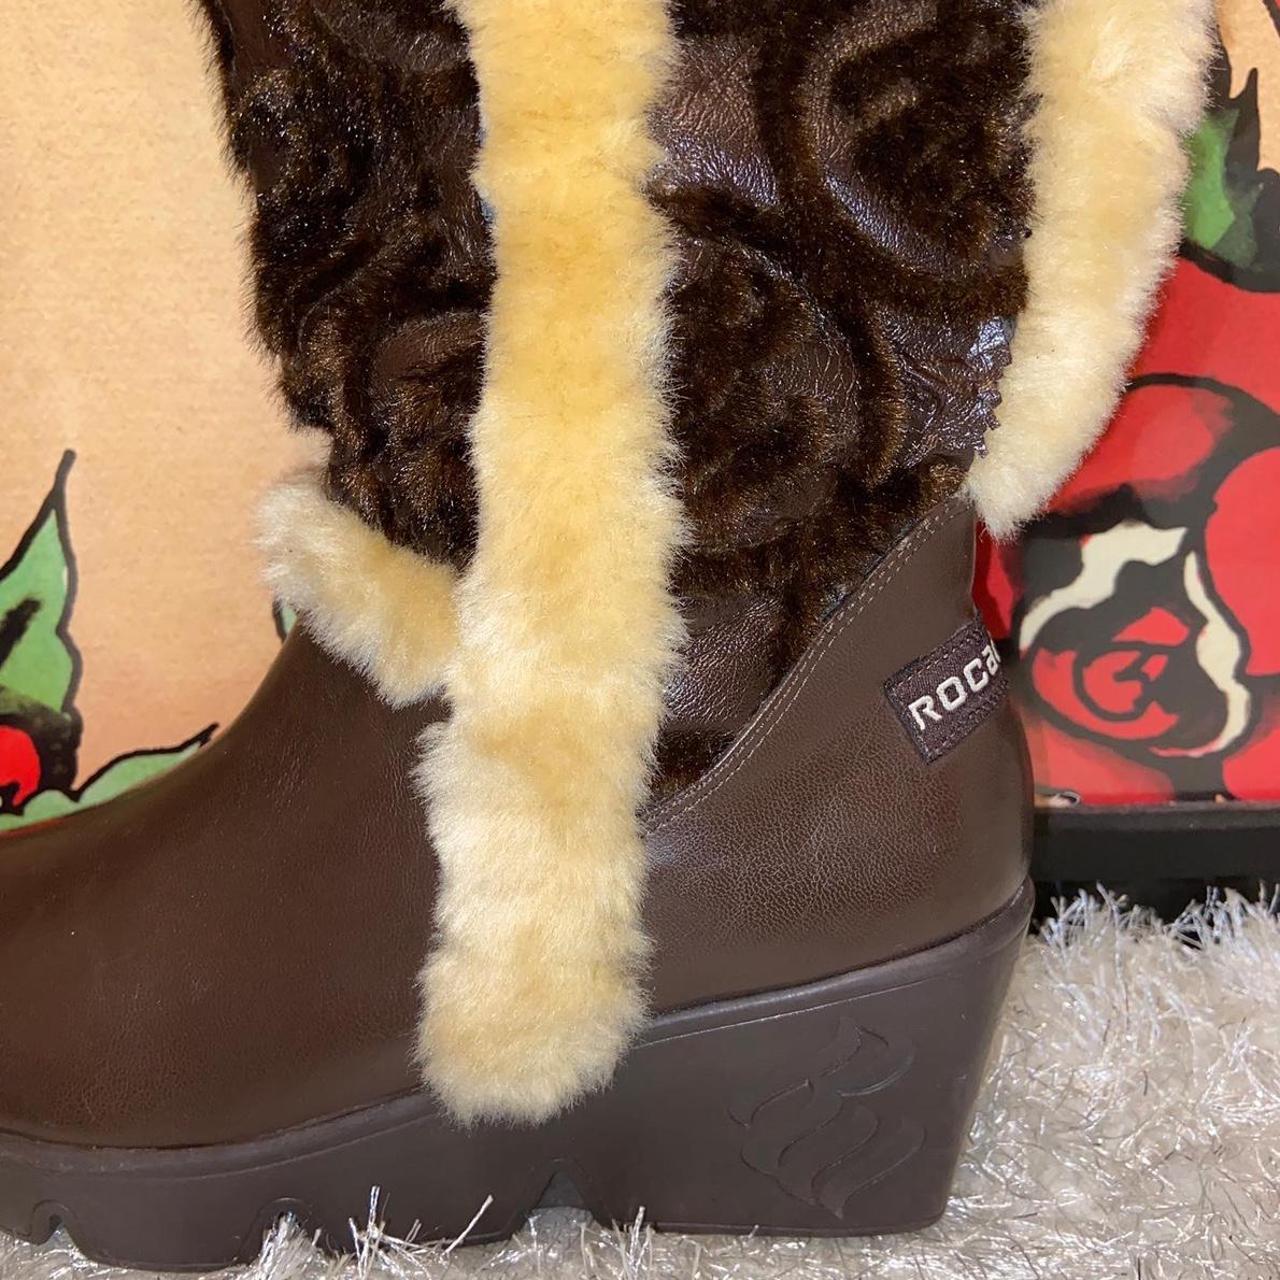 Product Image 3 - RocaWear(vintage) Faux Fur Handbag/Boot Set

FIRM

❌Will